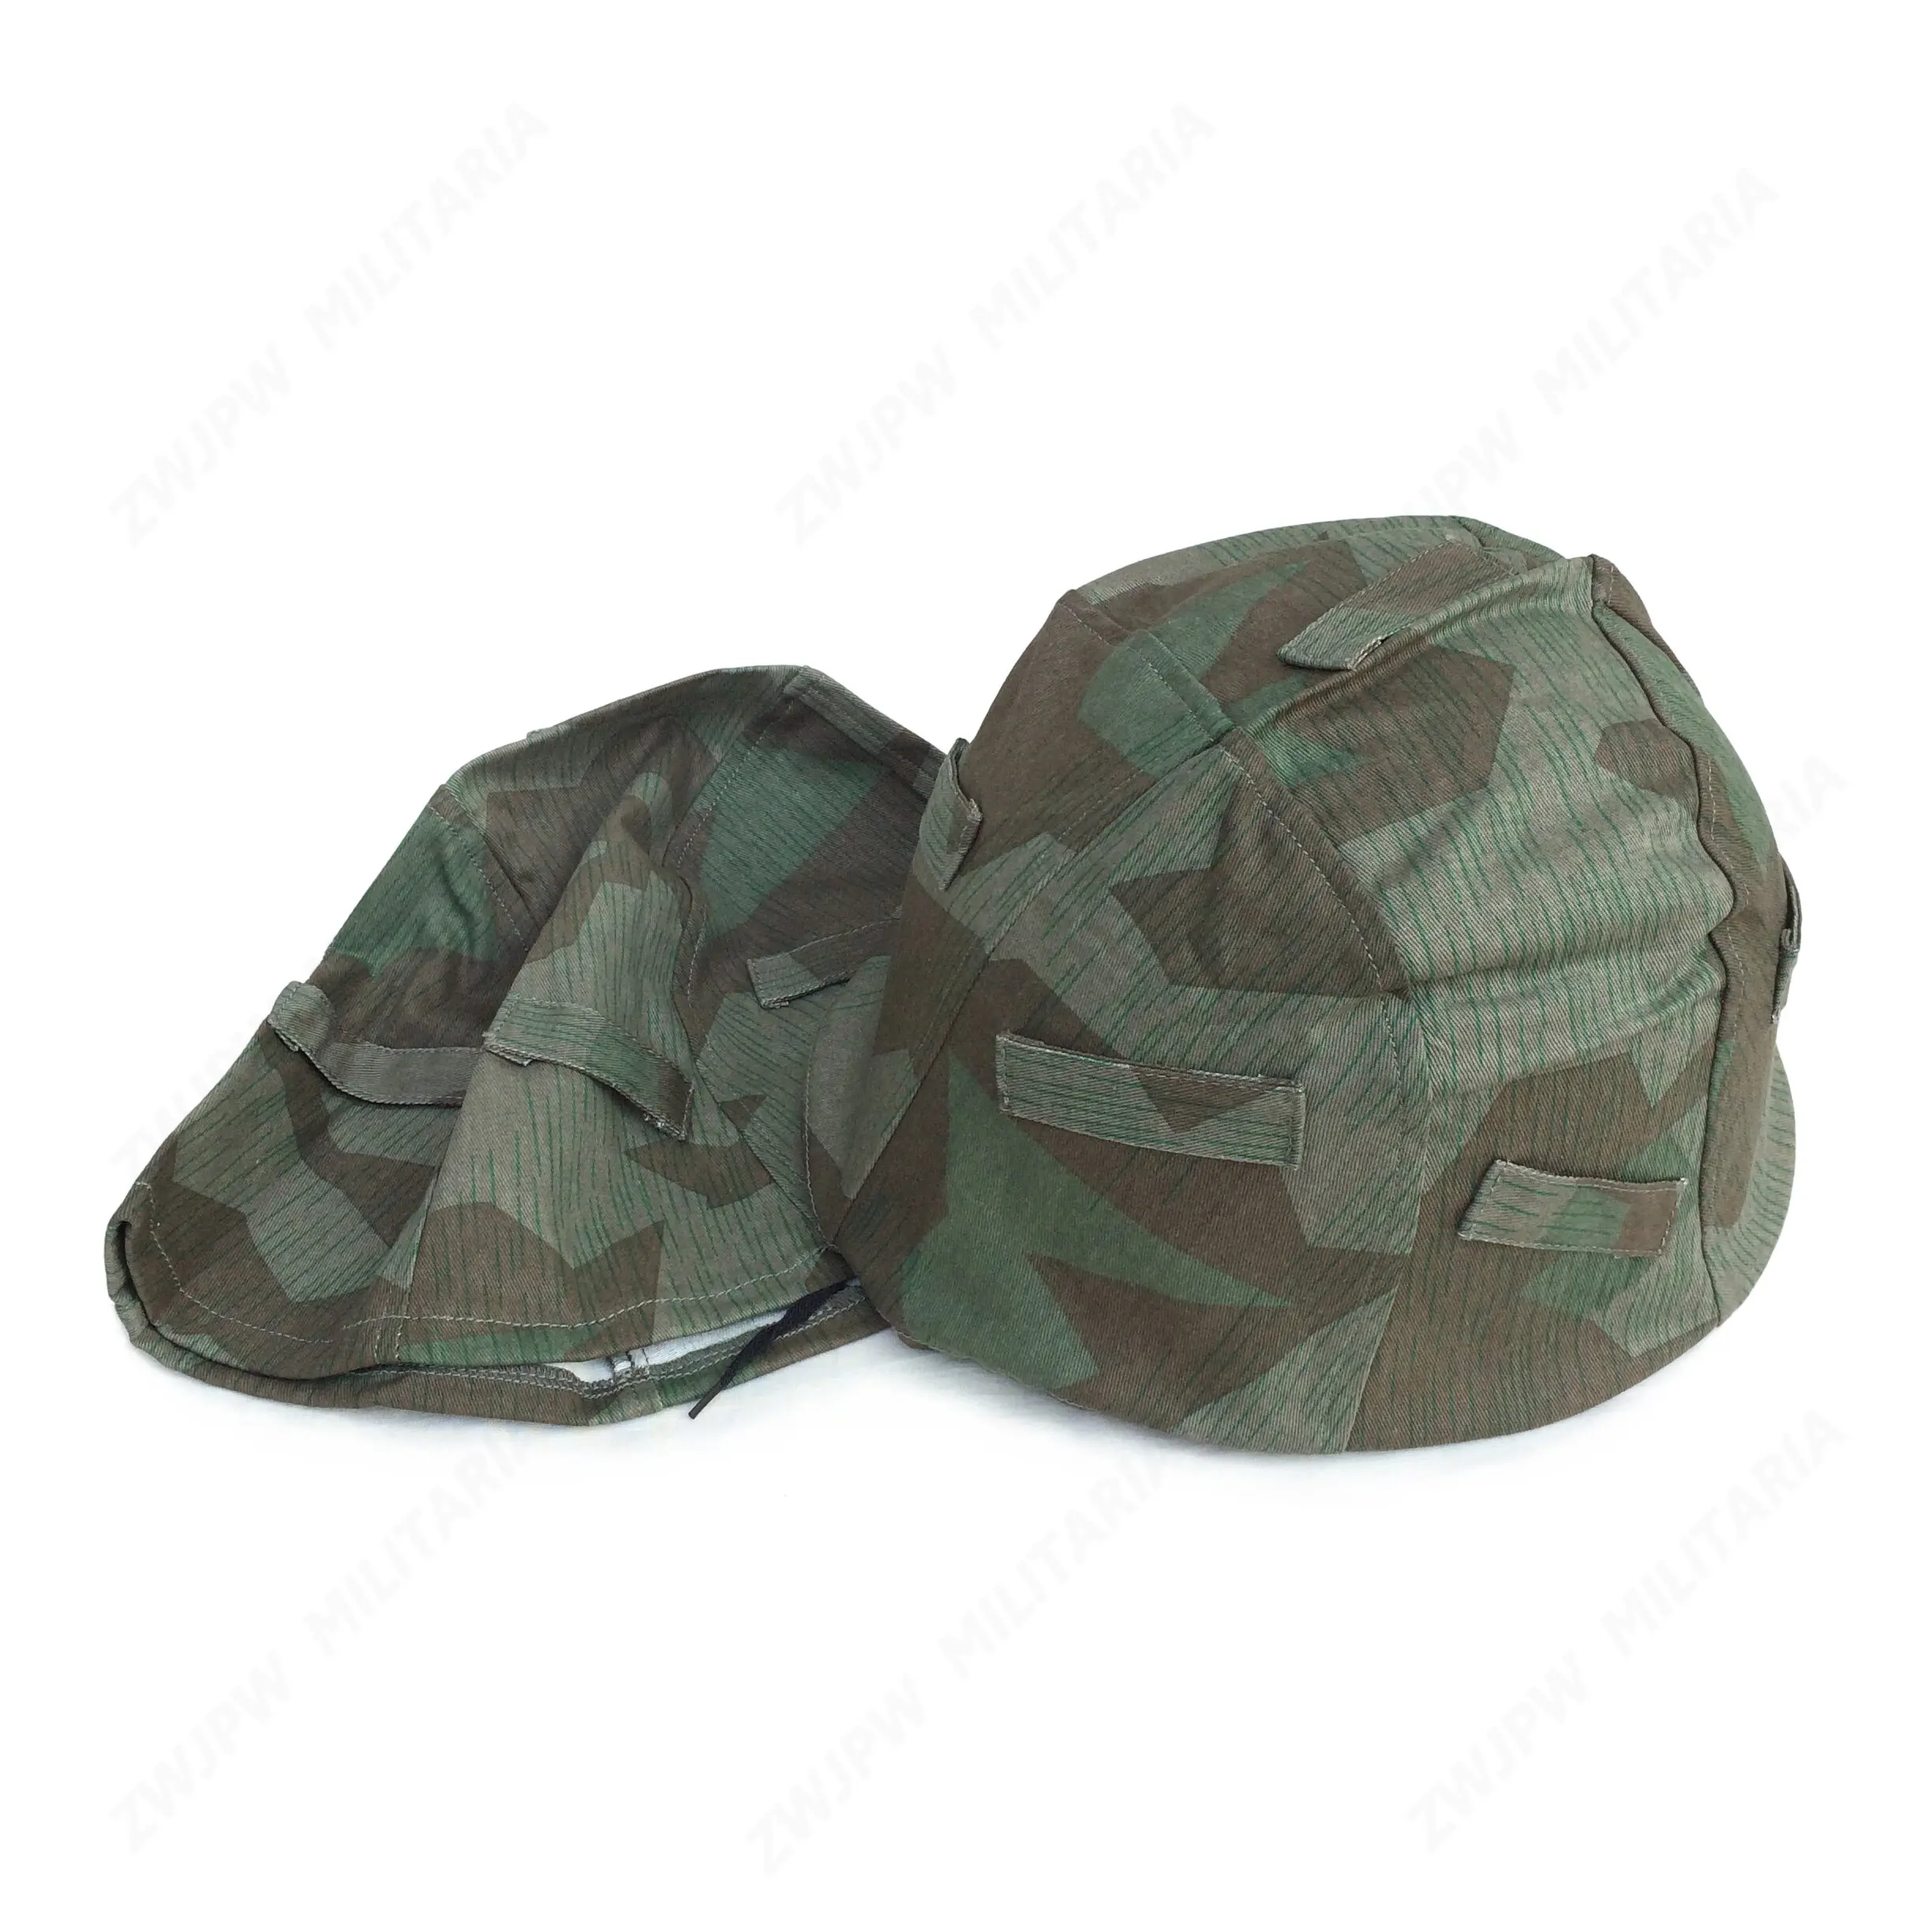 Does Not Include Helmet Replica WWII German Army M35 Helmet Cover Compatible Tactical Camouflage Cover for M35 Helmet 